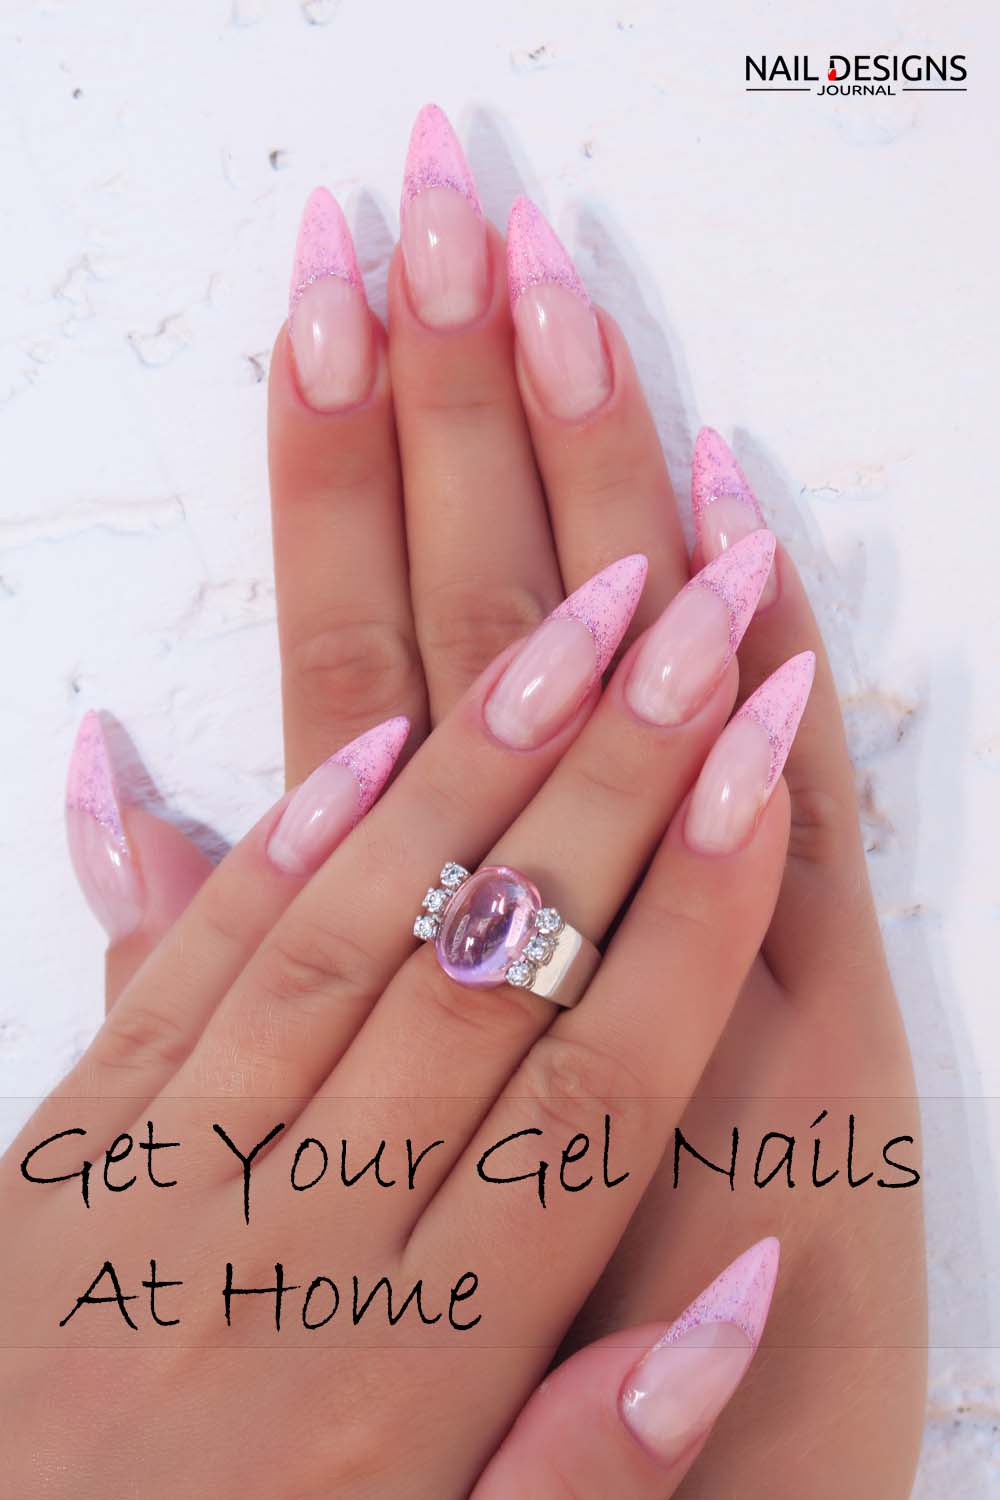 Get Your Gel Nails At Home